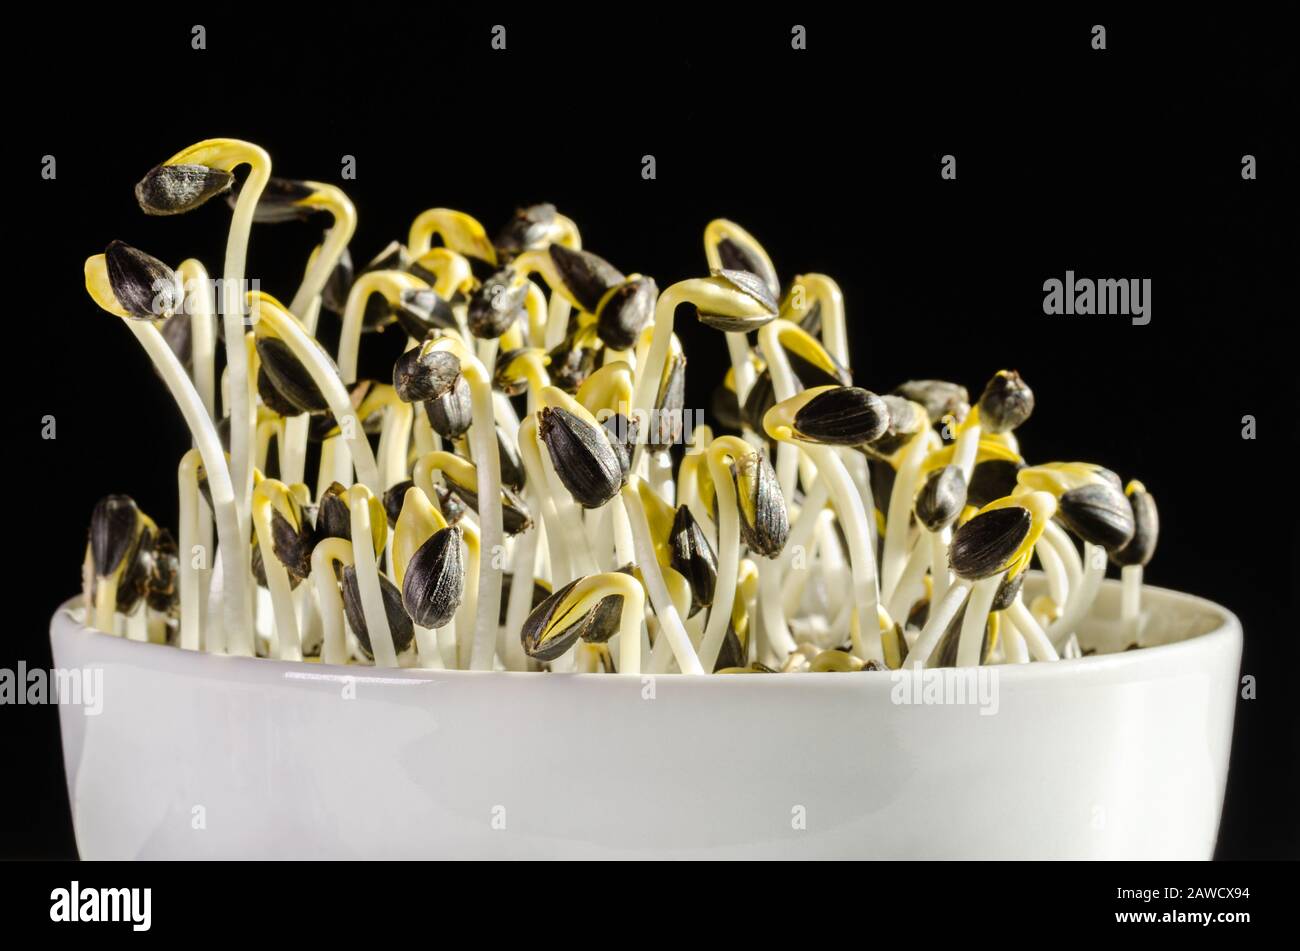 Sunflowers sprouting in a white bowl on black background. Front view of sprouts and microgreen of Helianthus annuus, the common sunflower. Stock Photo